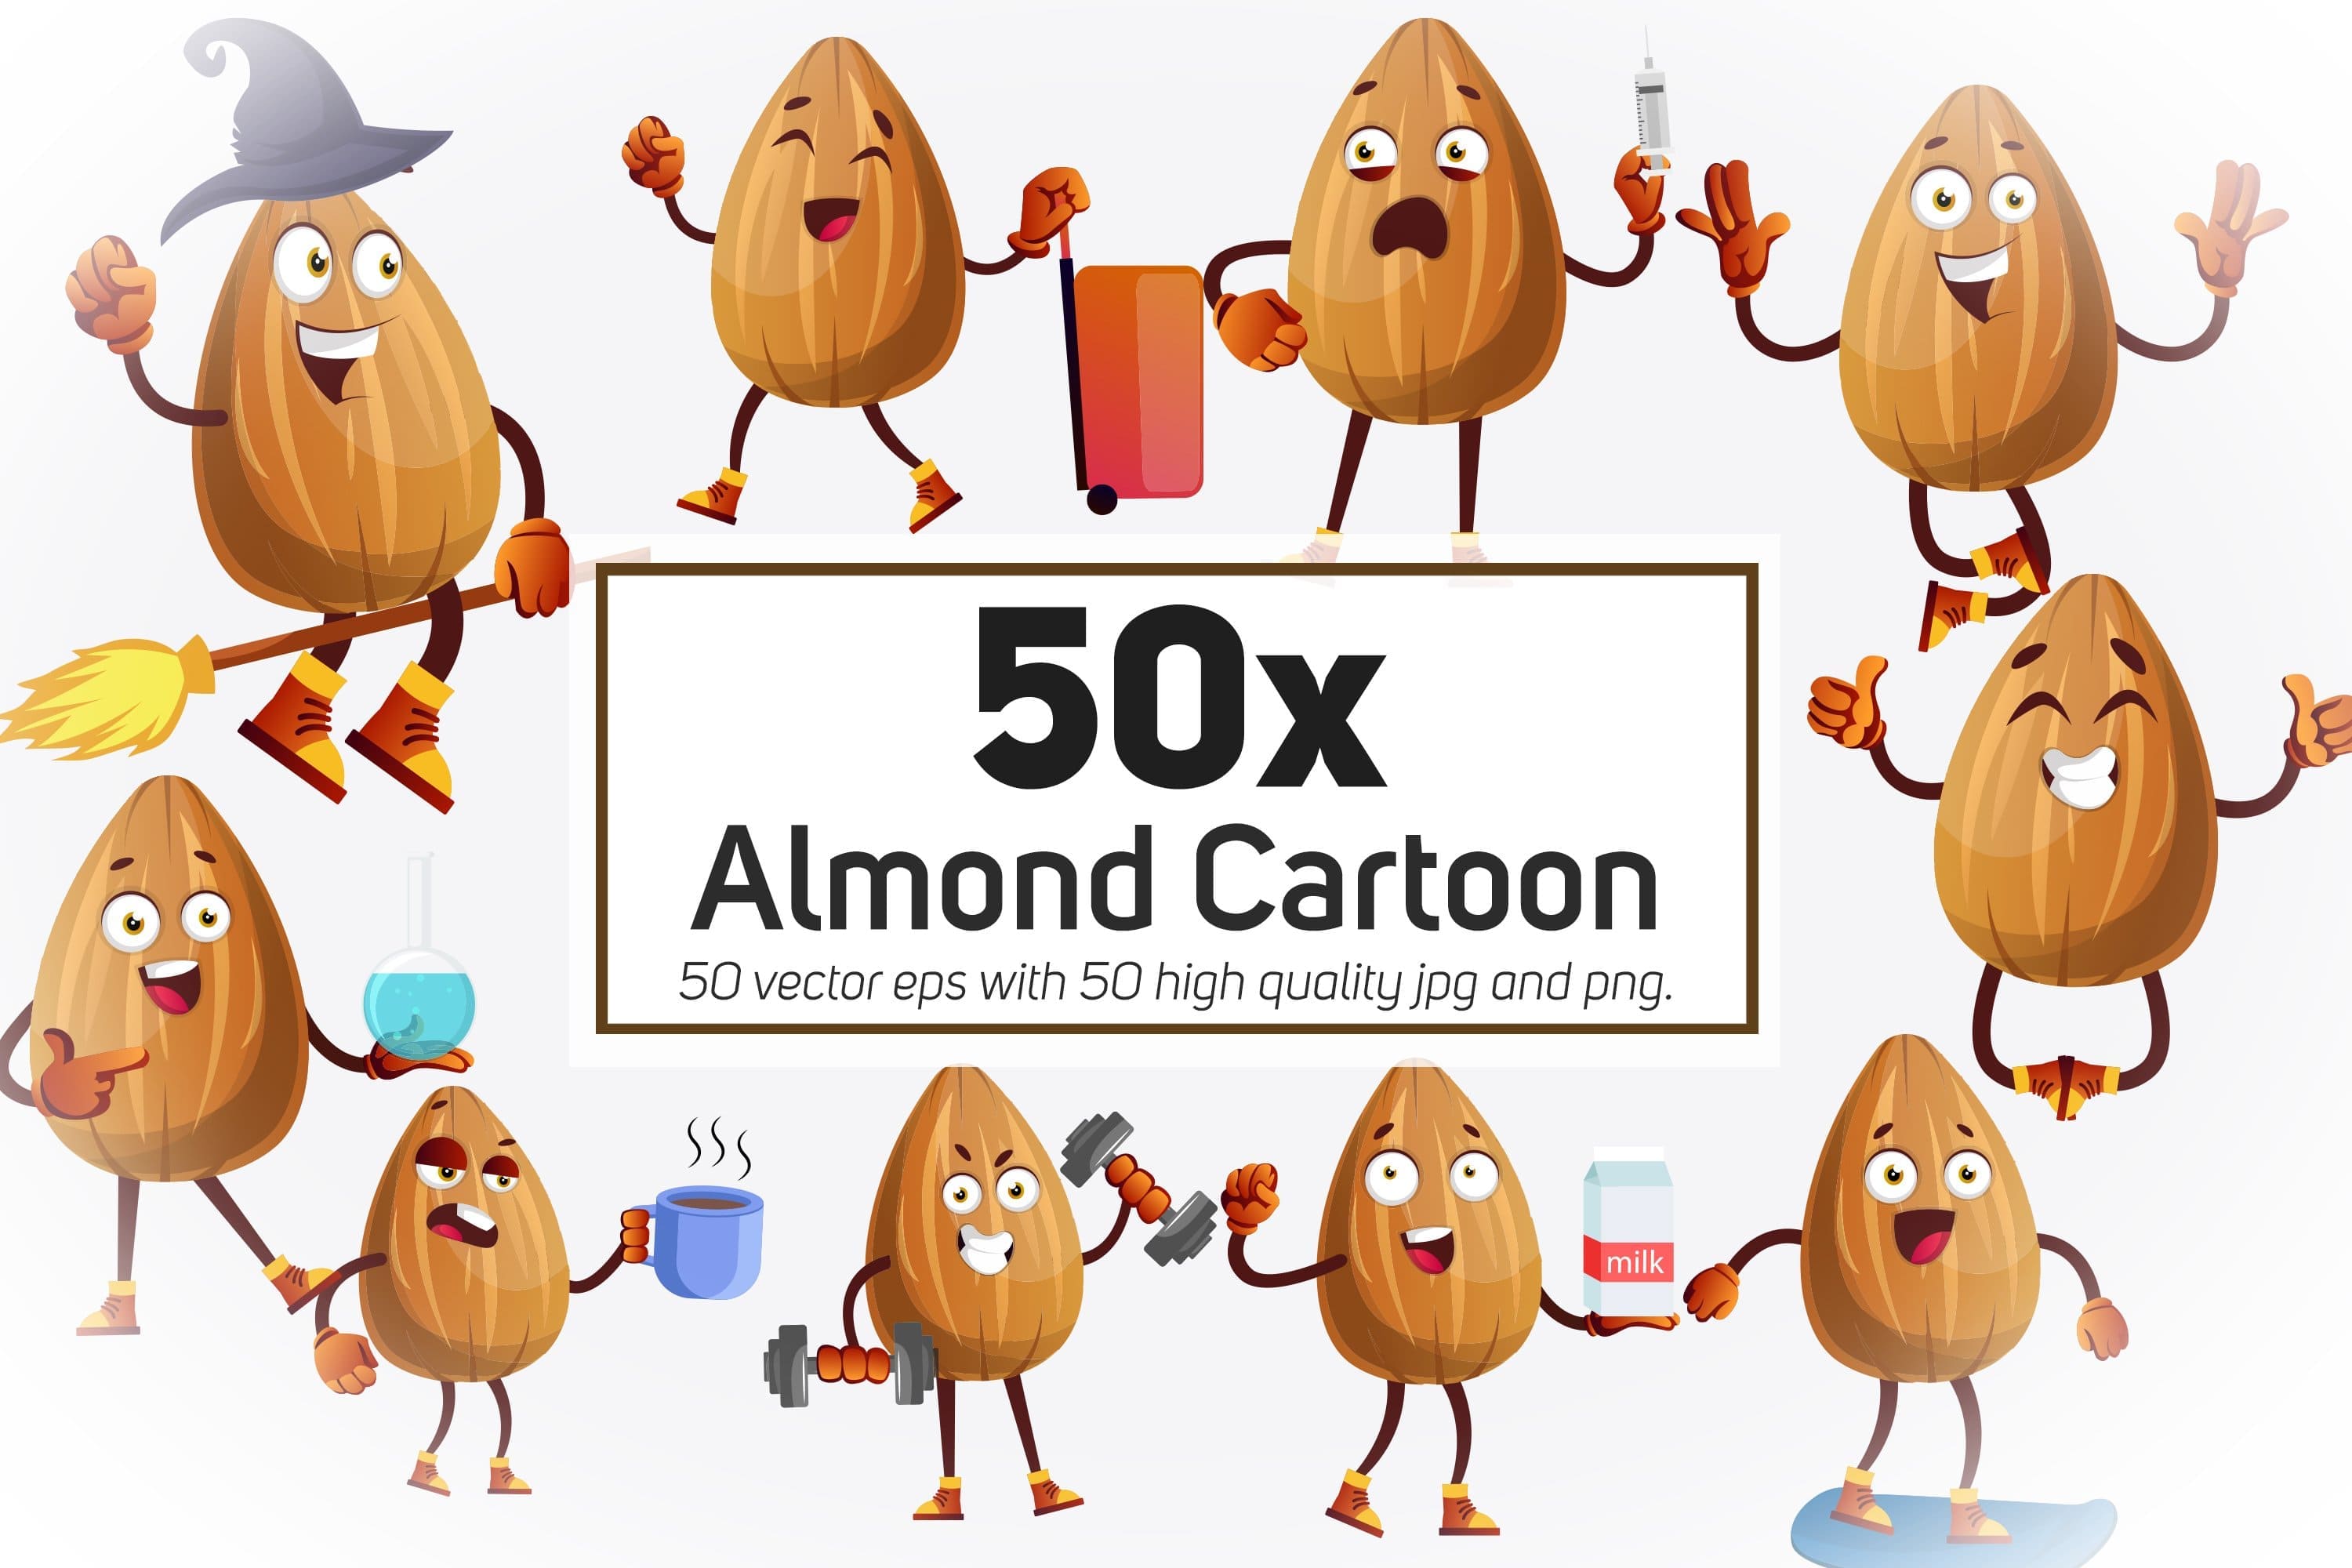 50x Almond in Different Cartoon Collection Illustration.